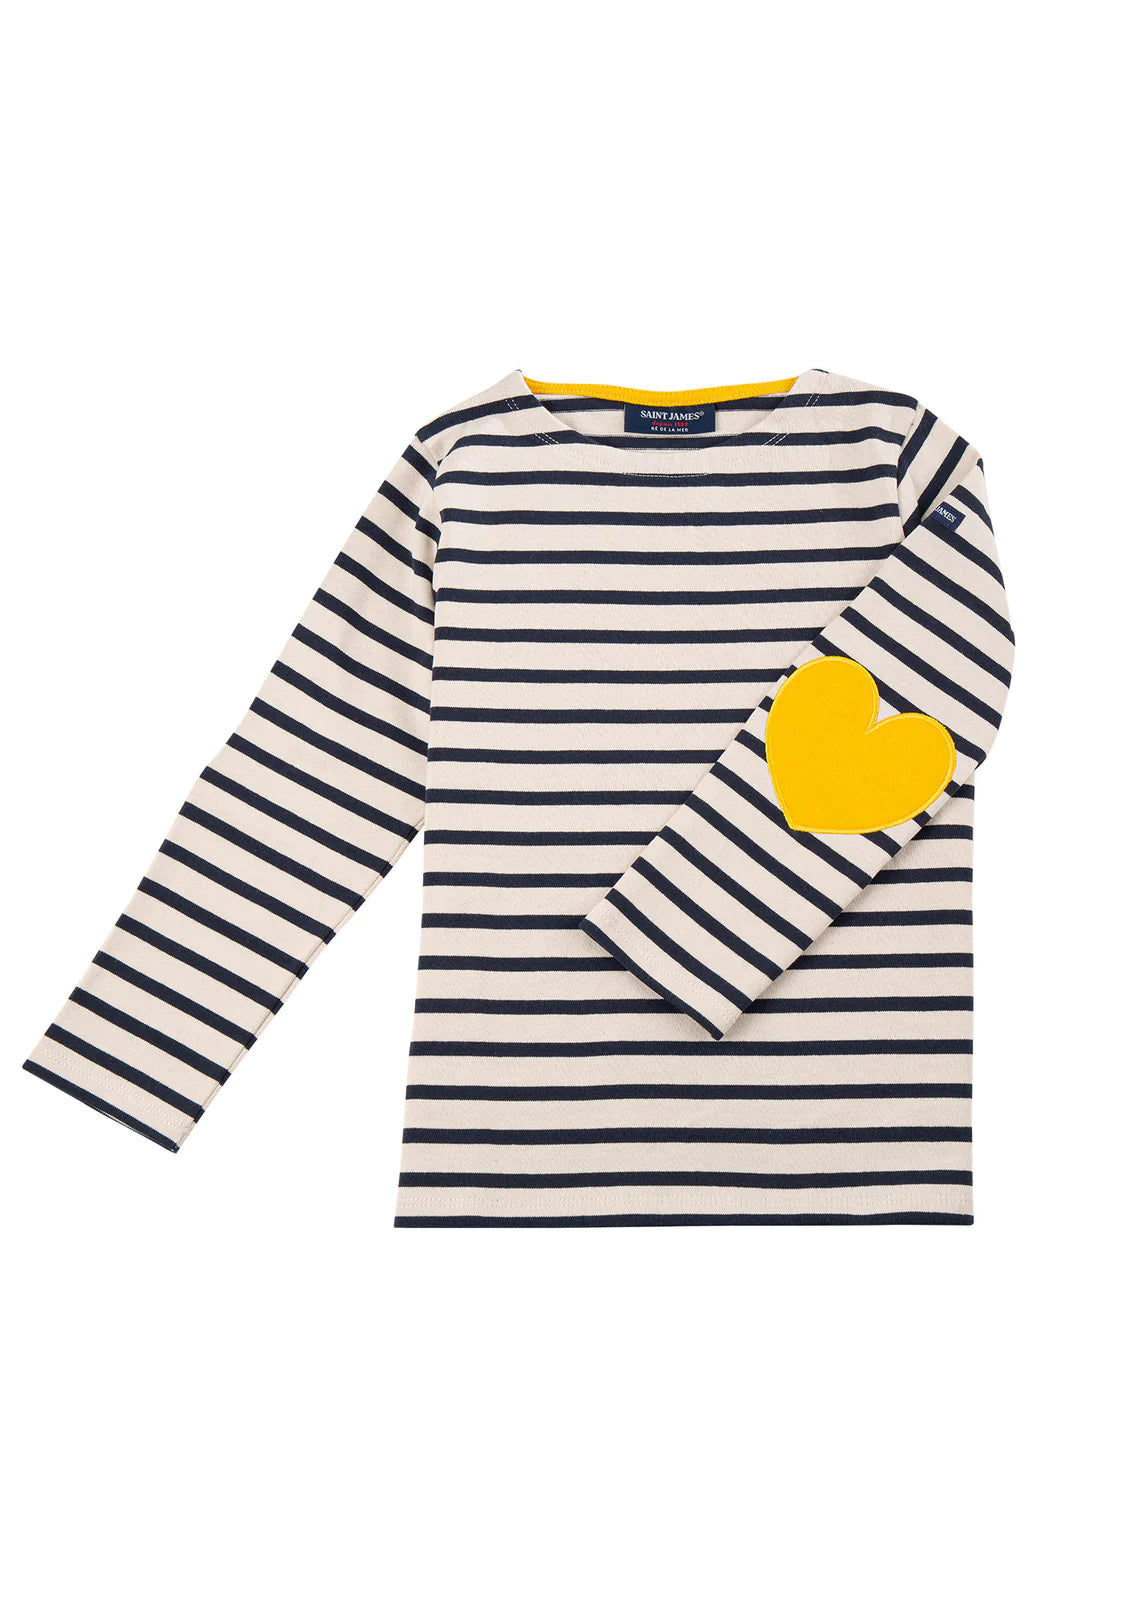 Children's Vaujany Striped Tee Shirt in Navy with Yellow